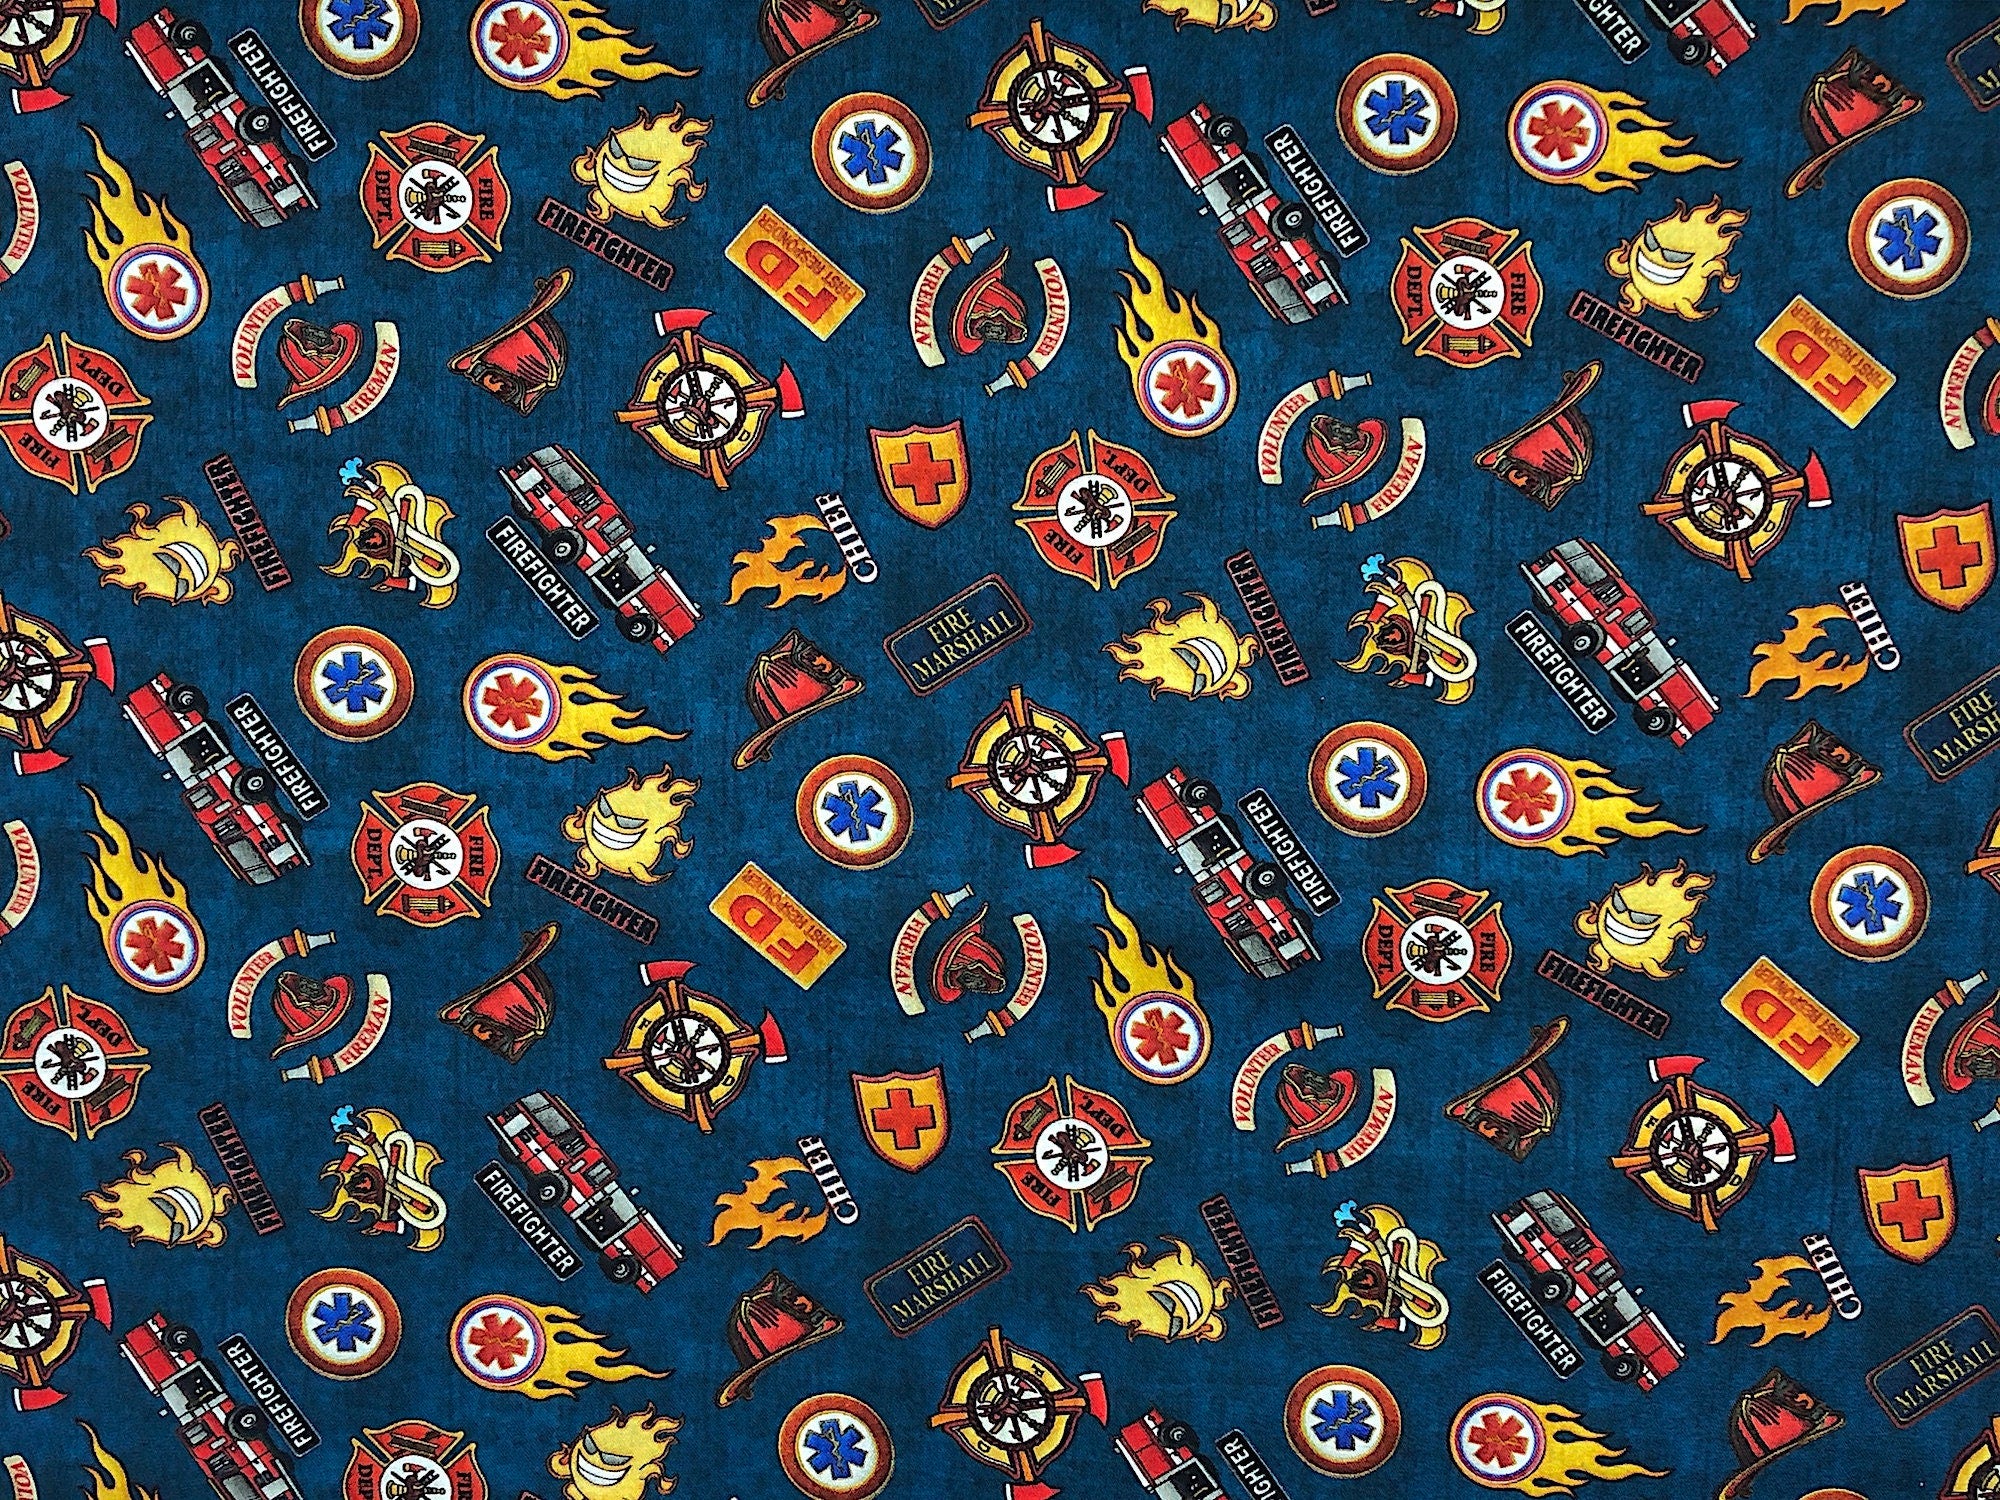 This fabric is covered with firefighter shields. This fabric is part of the 5 Alarm collection